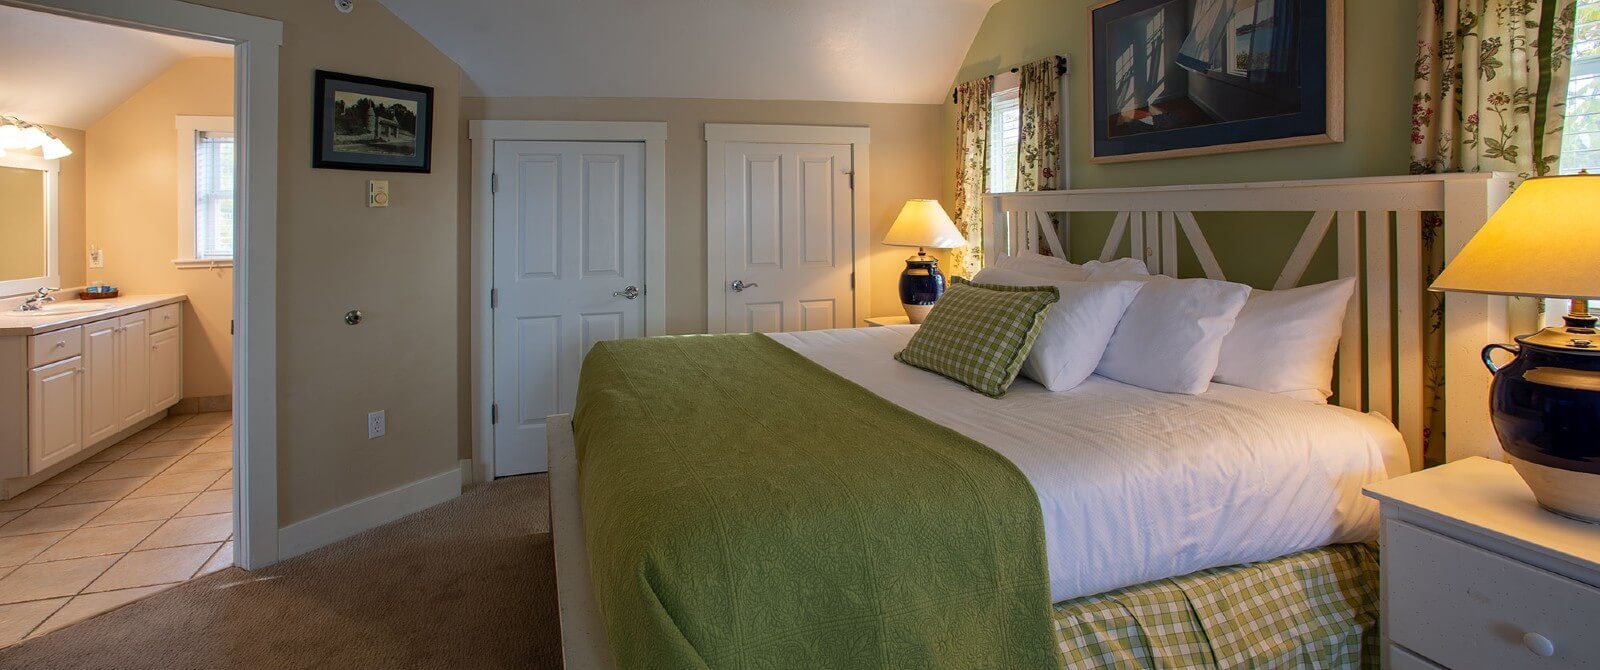 Bedroom with king bed in white and green linens, side tables with lamps and doorway into a large bathroom